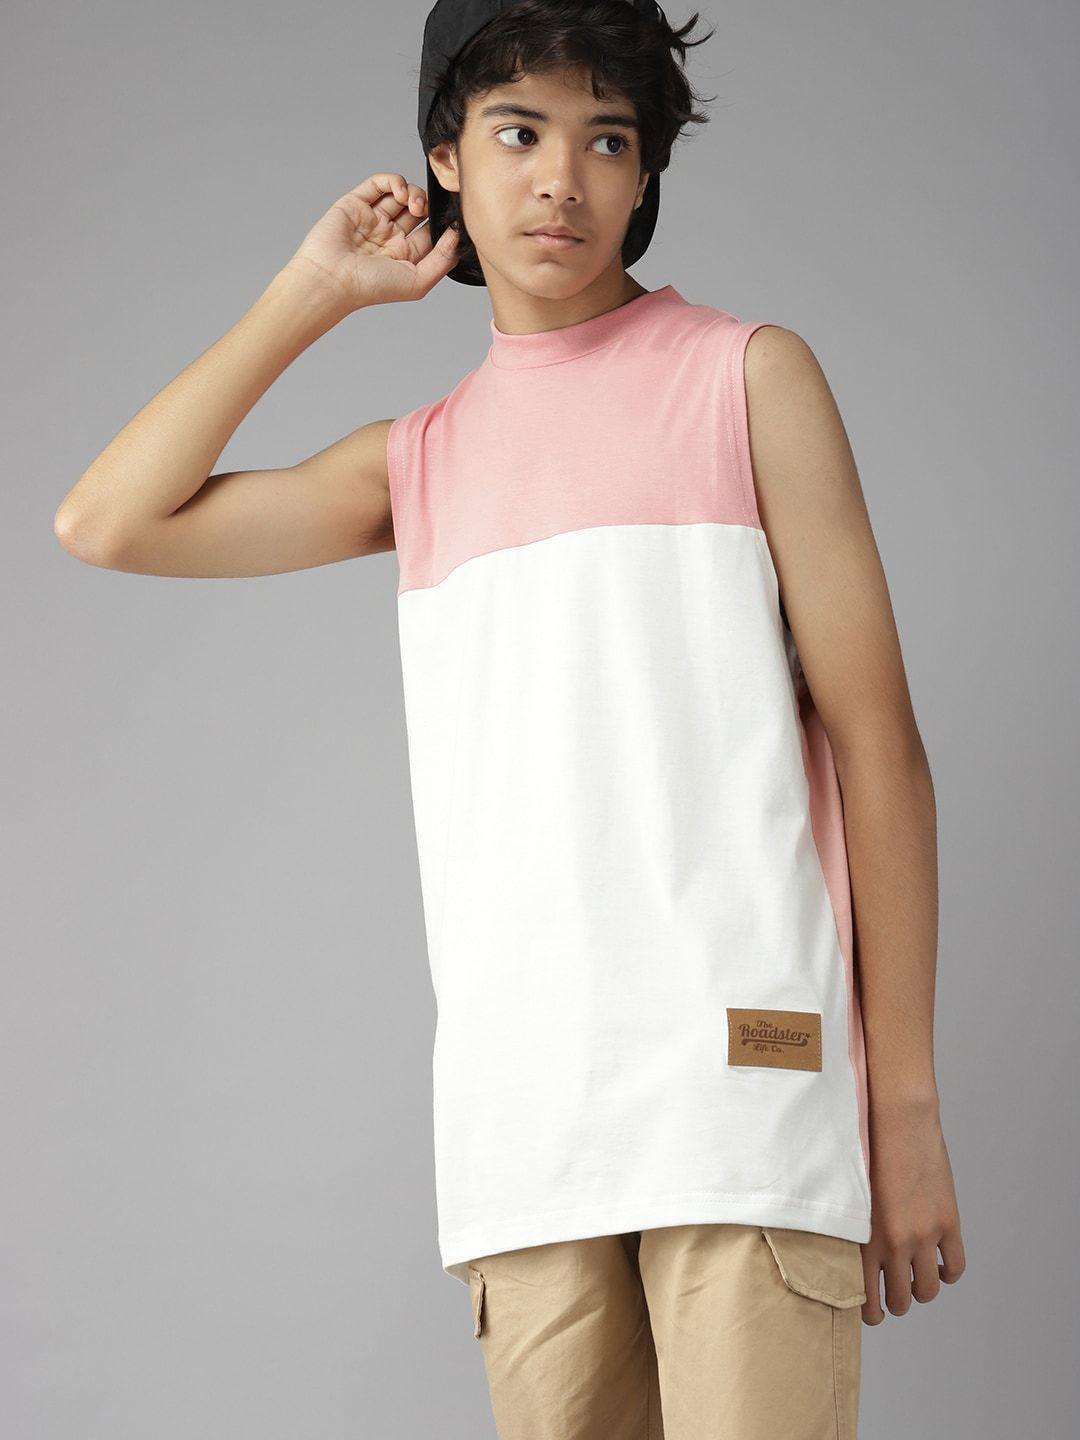 uth-by-roadster-boys-white-&-peach-coloured-colourblocked-pure-cotton-t-shirt